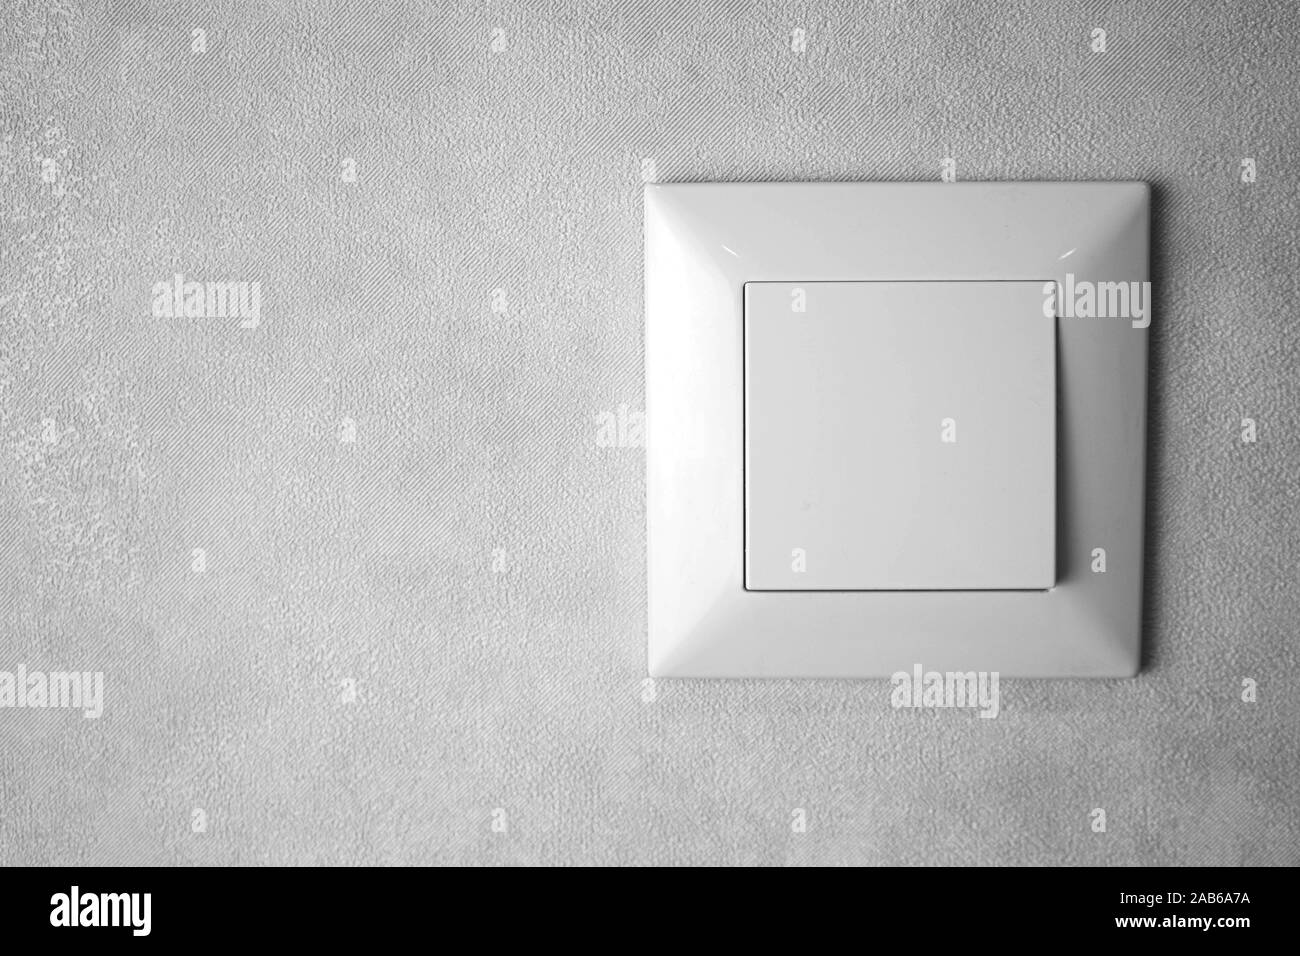 a light switch, a plastic mechanical switch of white color installed on a light gray wall. Stock Photo